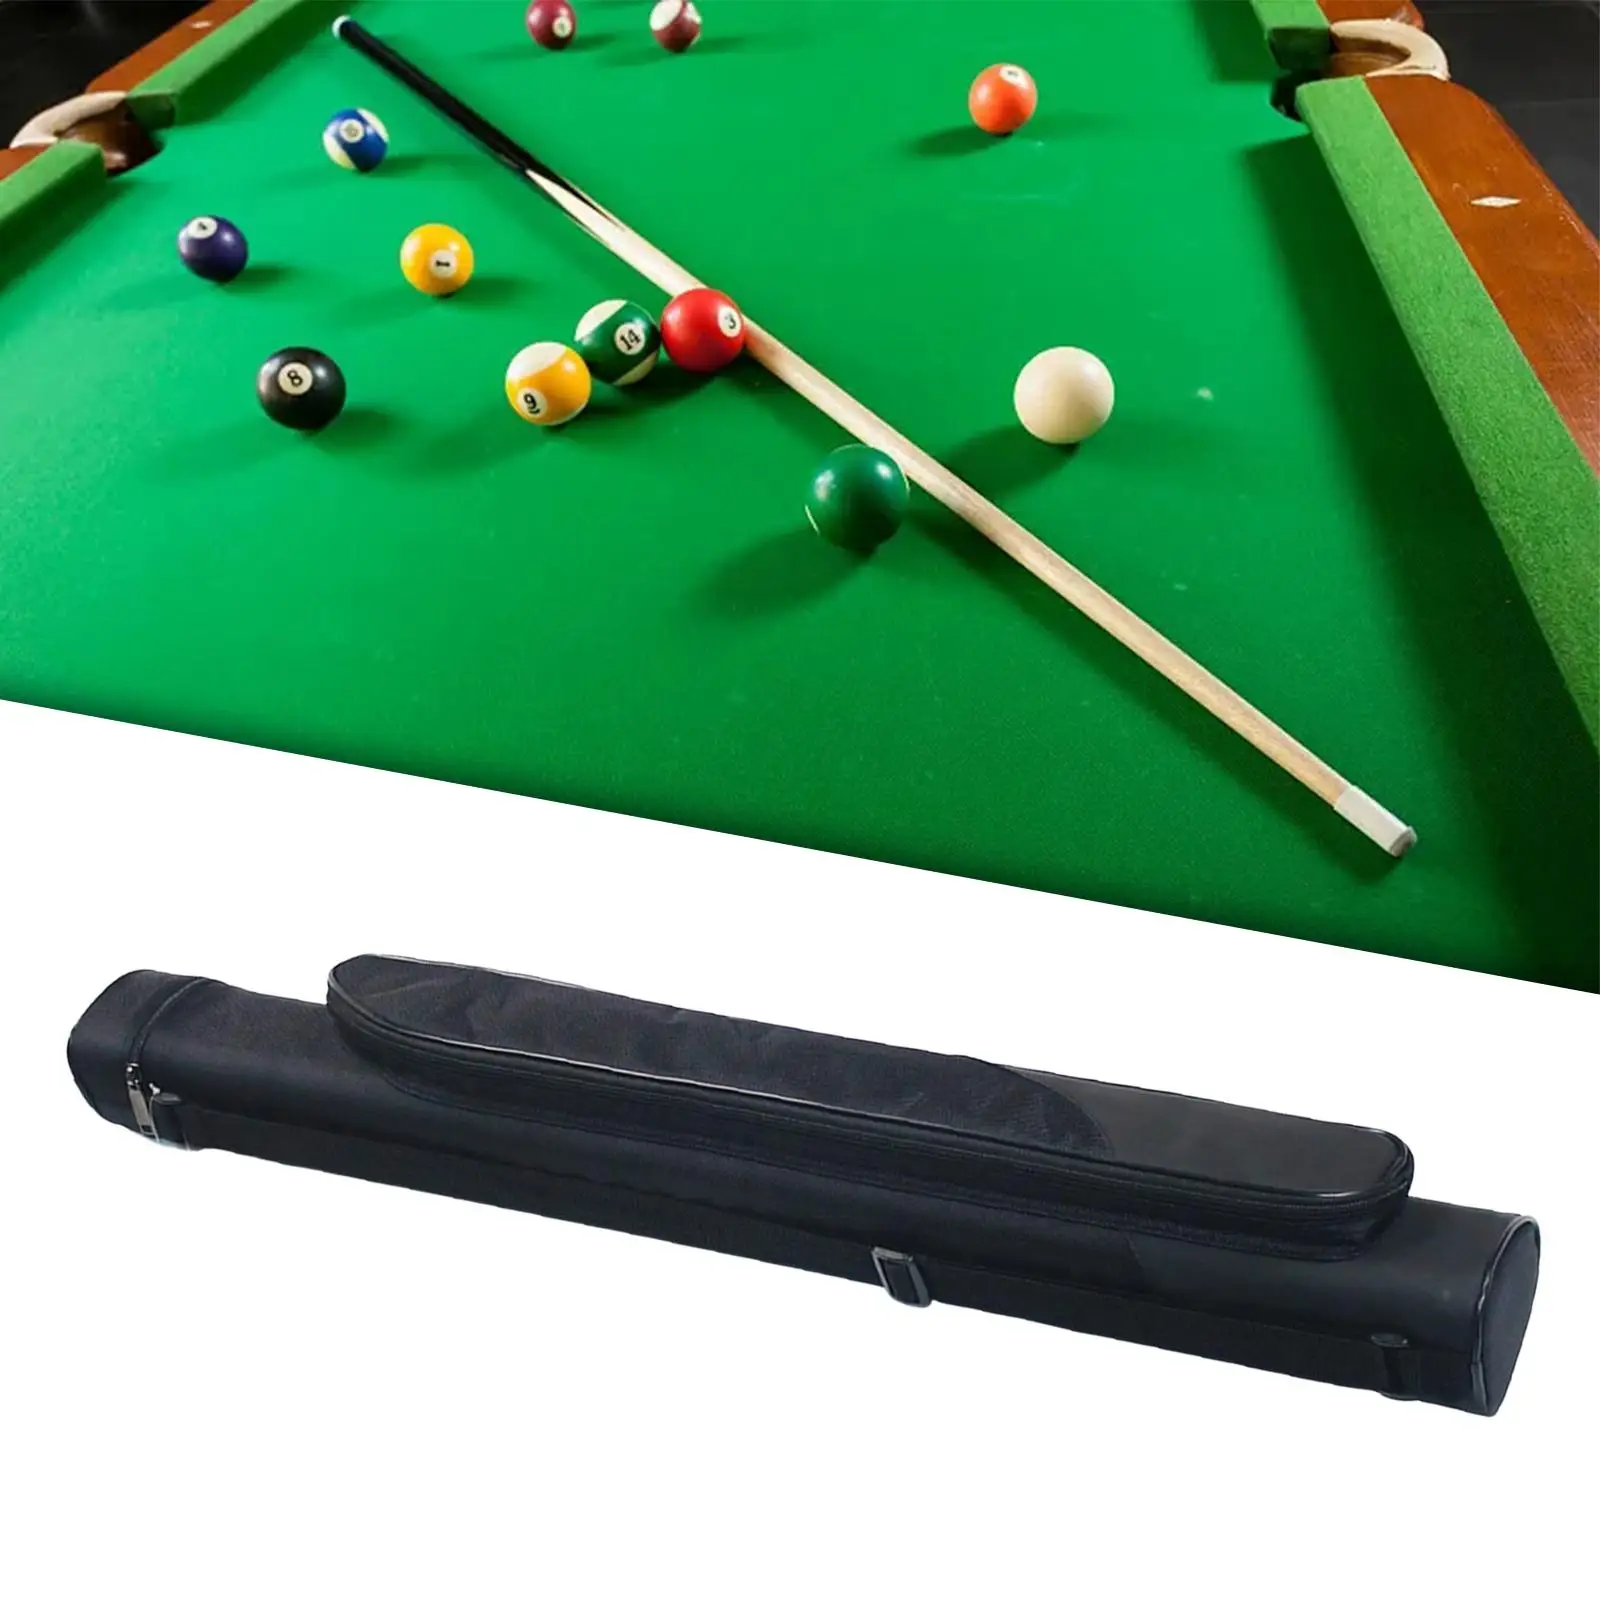 Billiard Pool Cue Stick Carrying Bag Pool Cue Cases Lightweight Pool Table